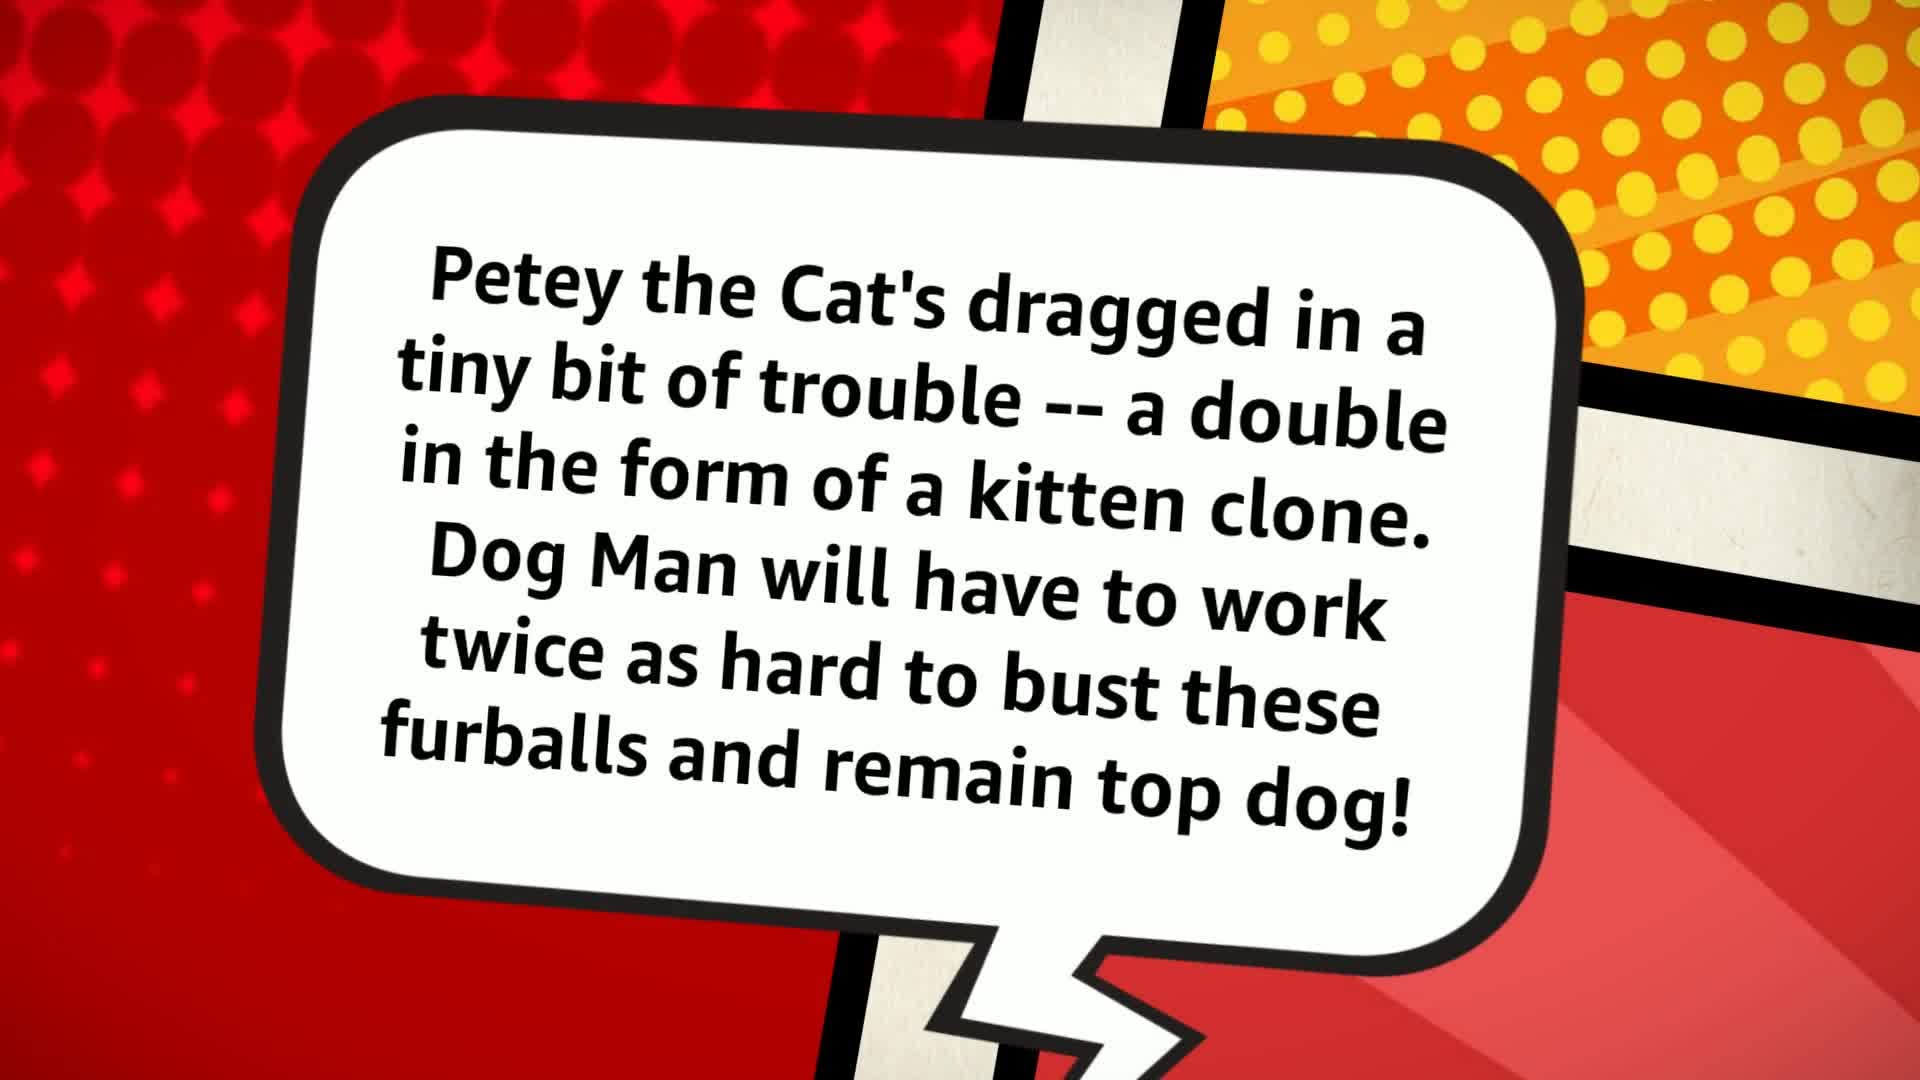 Dog Man: A Tale of Two Kitties: A Graphic Novel (Dog Man #3): From the Creator of Captain Underpants (3)